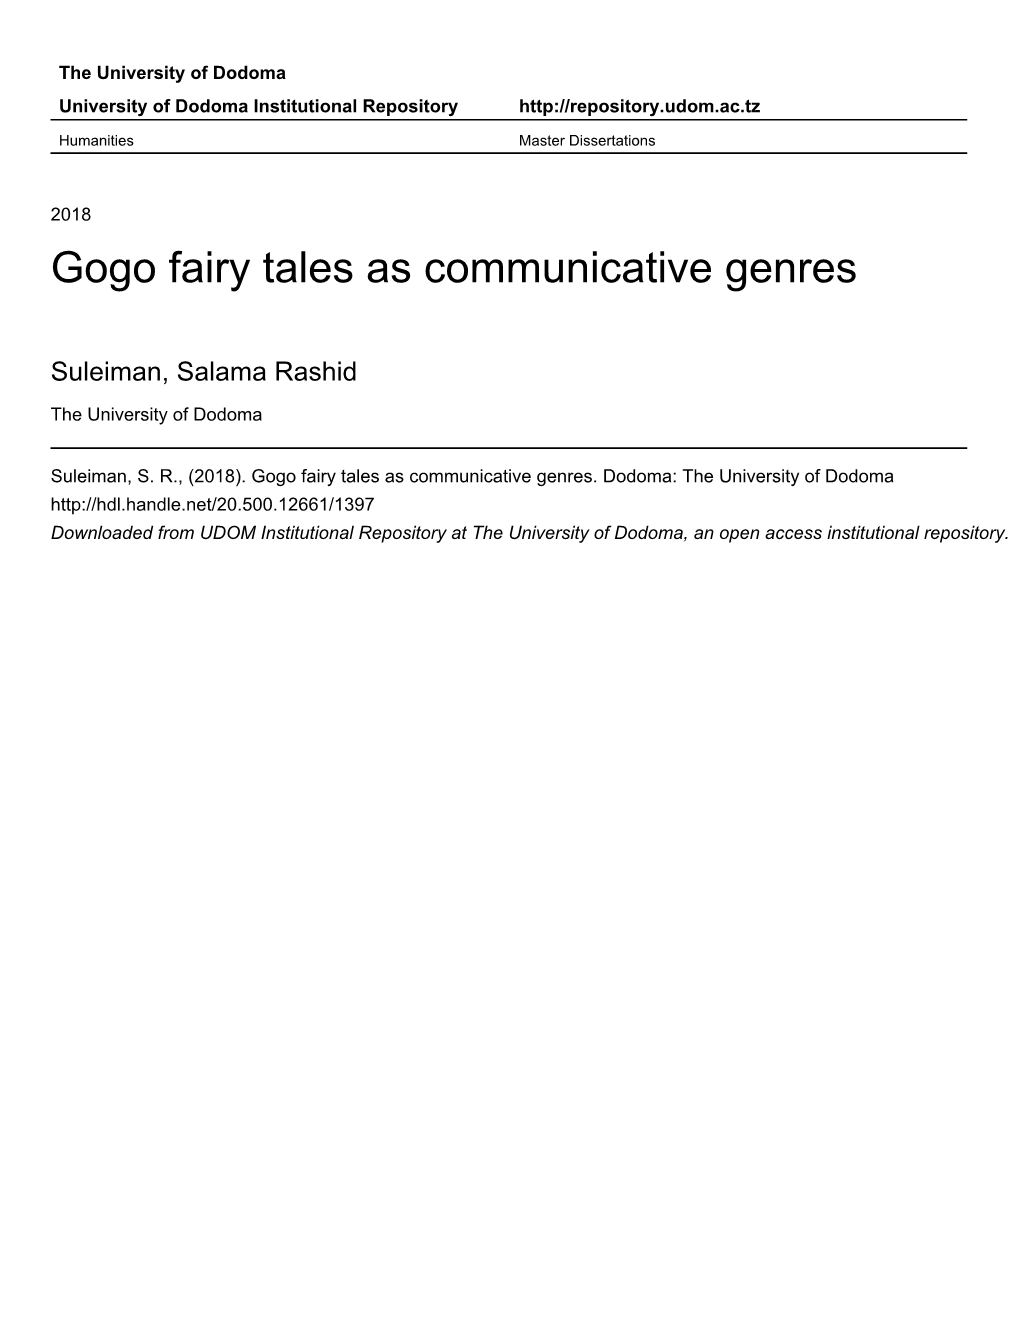 Gogo Fairy Tales As Communicative Genres